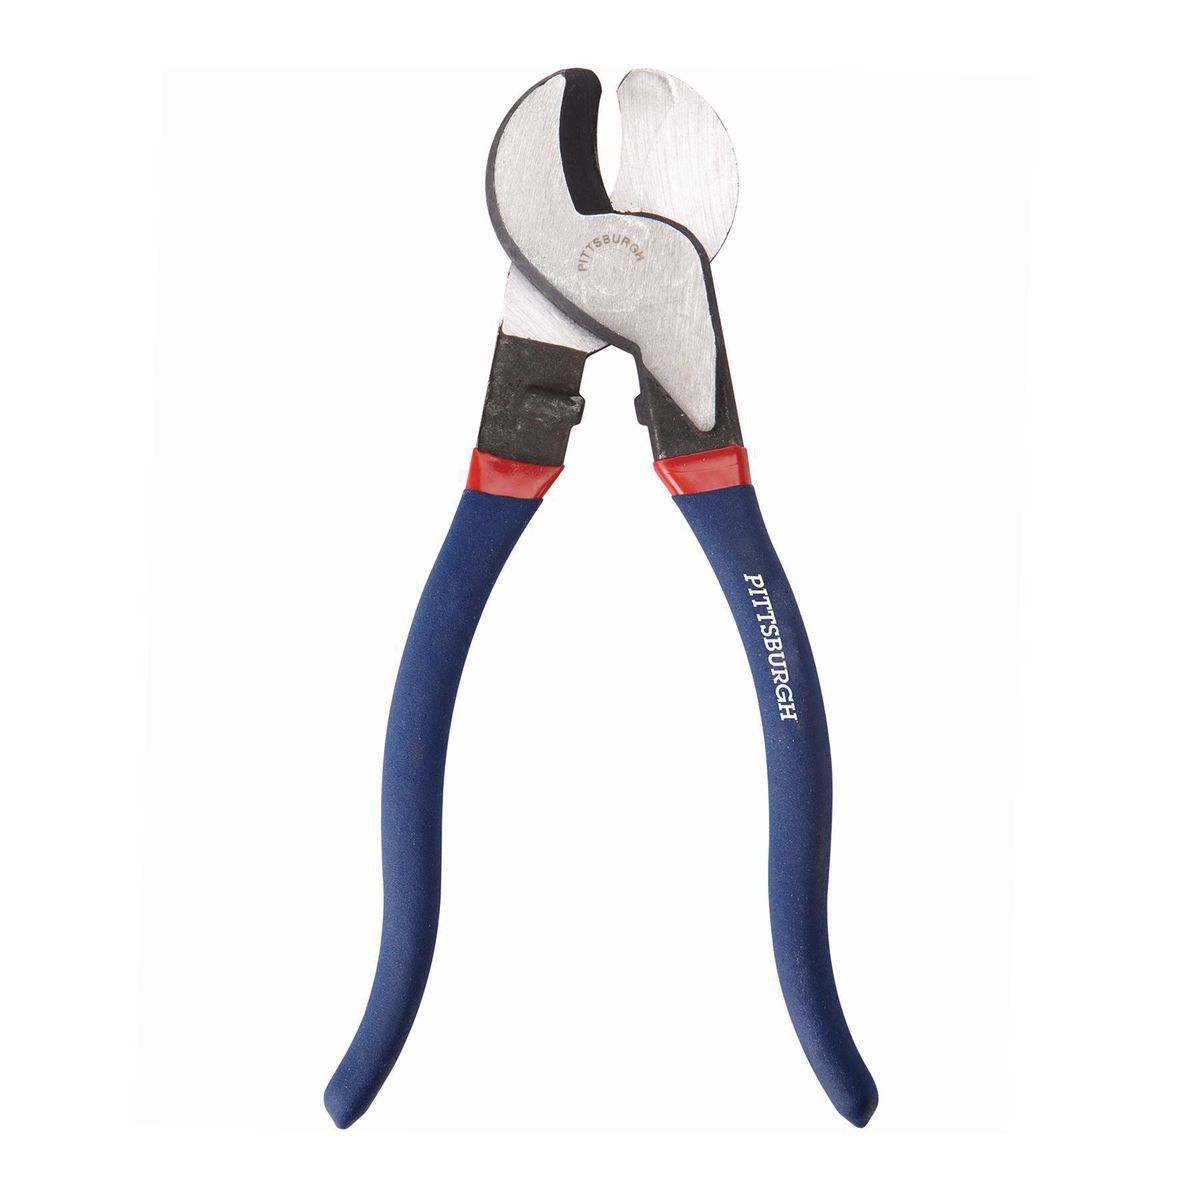 PITTSBURGH 10" Cable Cutter